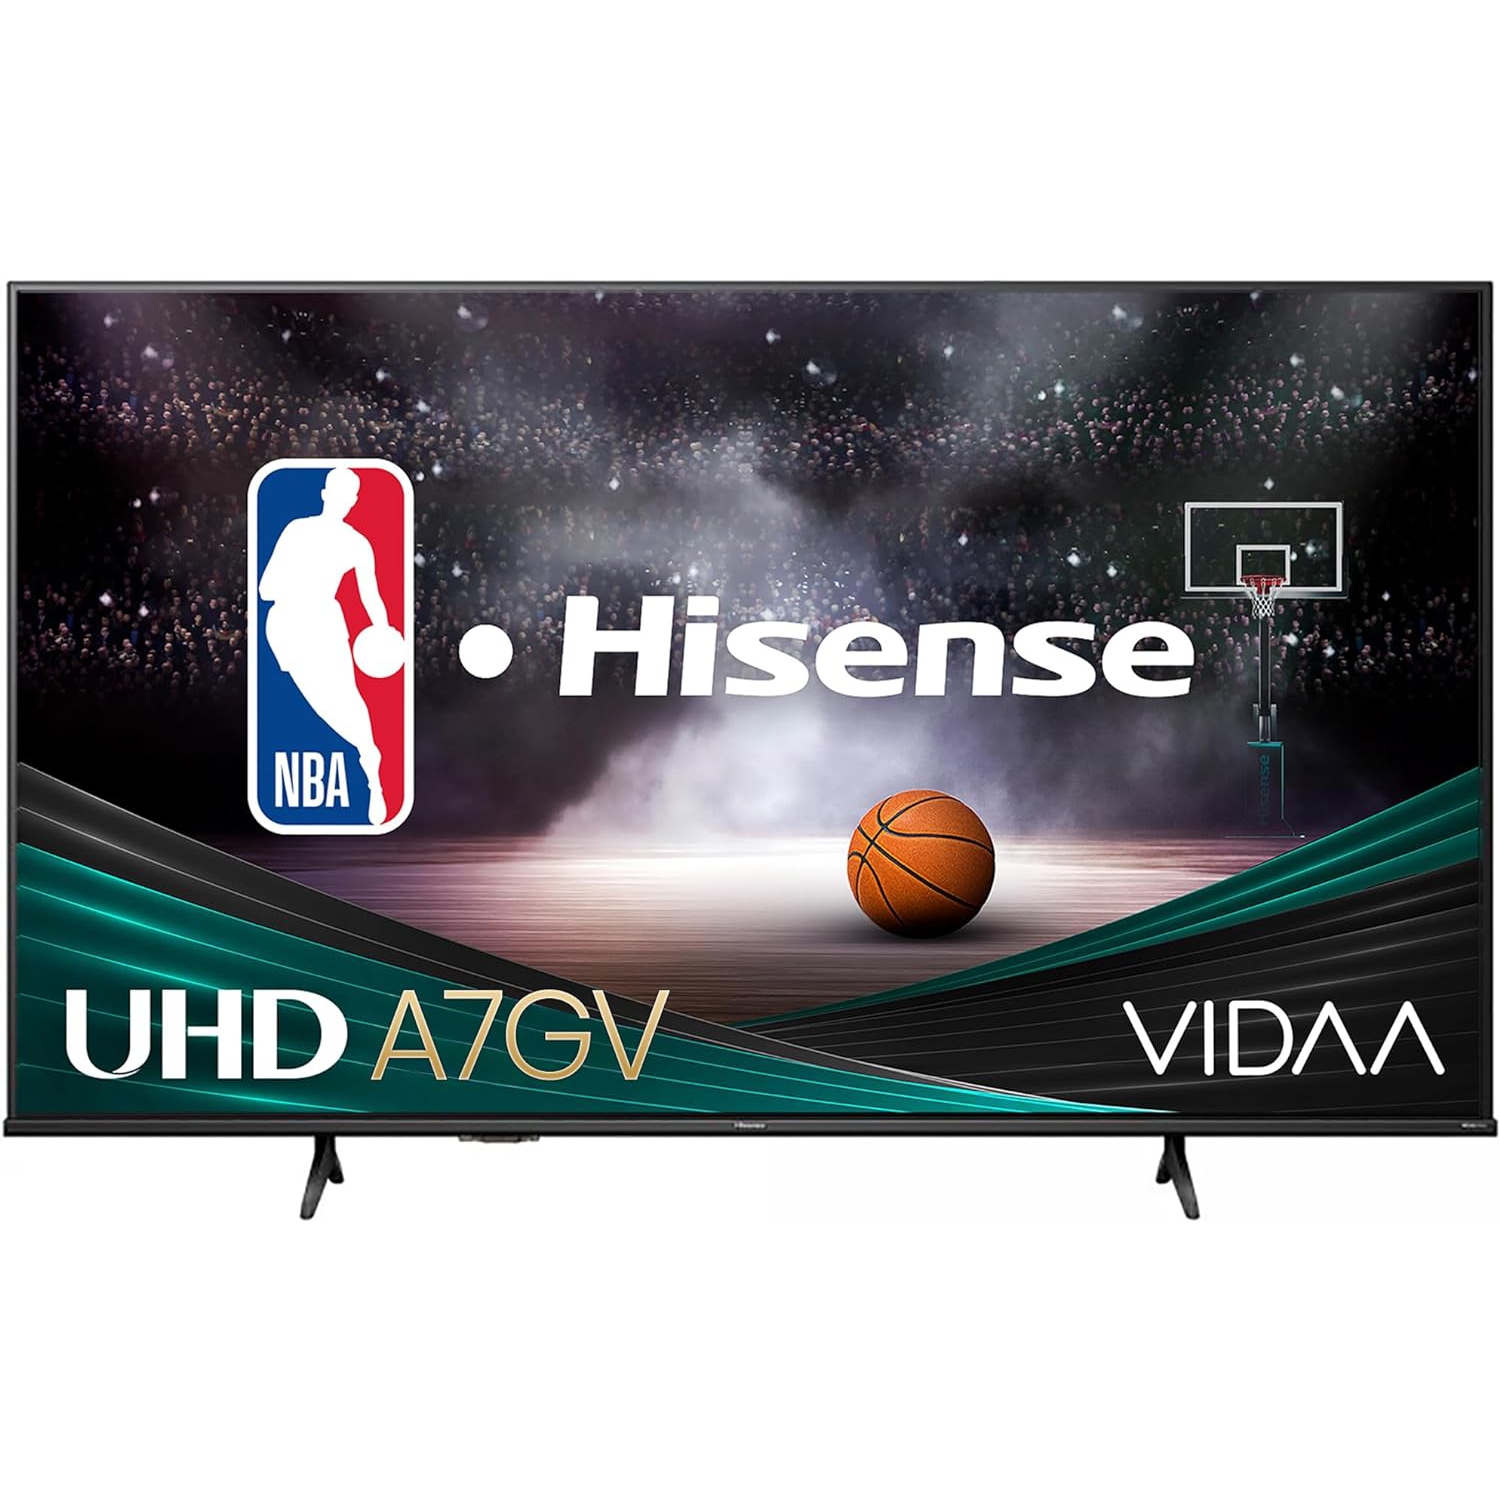 Hisense 43A7GV - 43 inch 4K Ultra HD VIDAA Smart TV,Dolby Vision HDR, Built in Amazon Alexa, with Voice Remote (Canada Model)